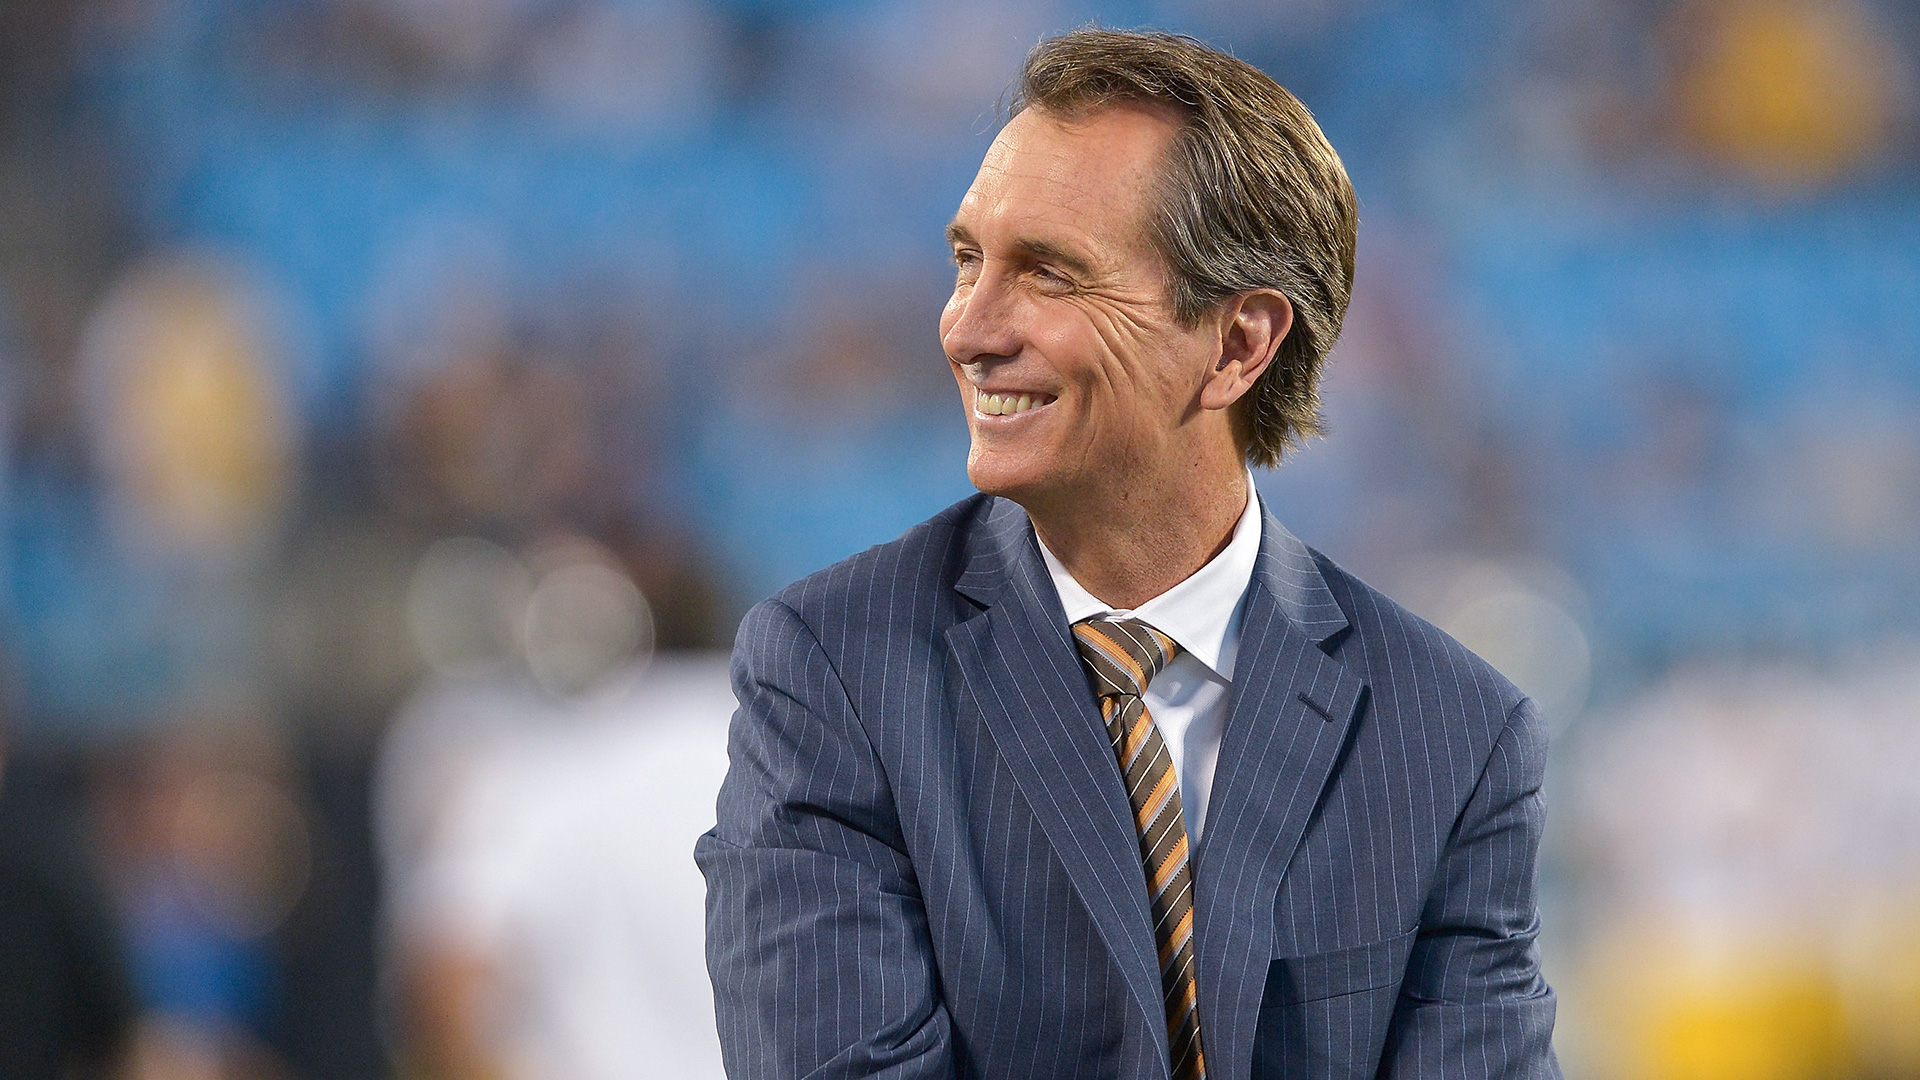 Cris Collinsworth ripped for sexist comment about female fans' football knowledge, later apologizes